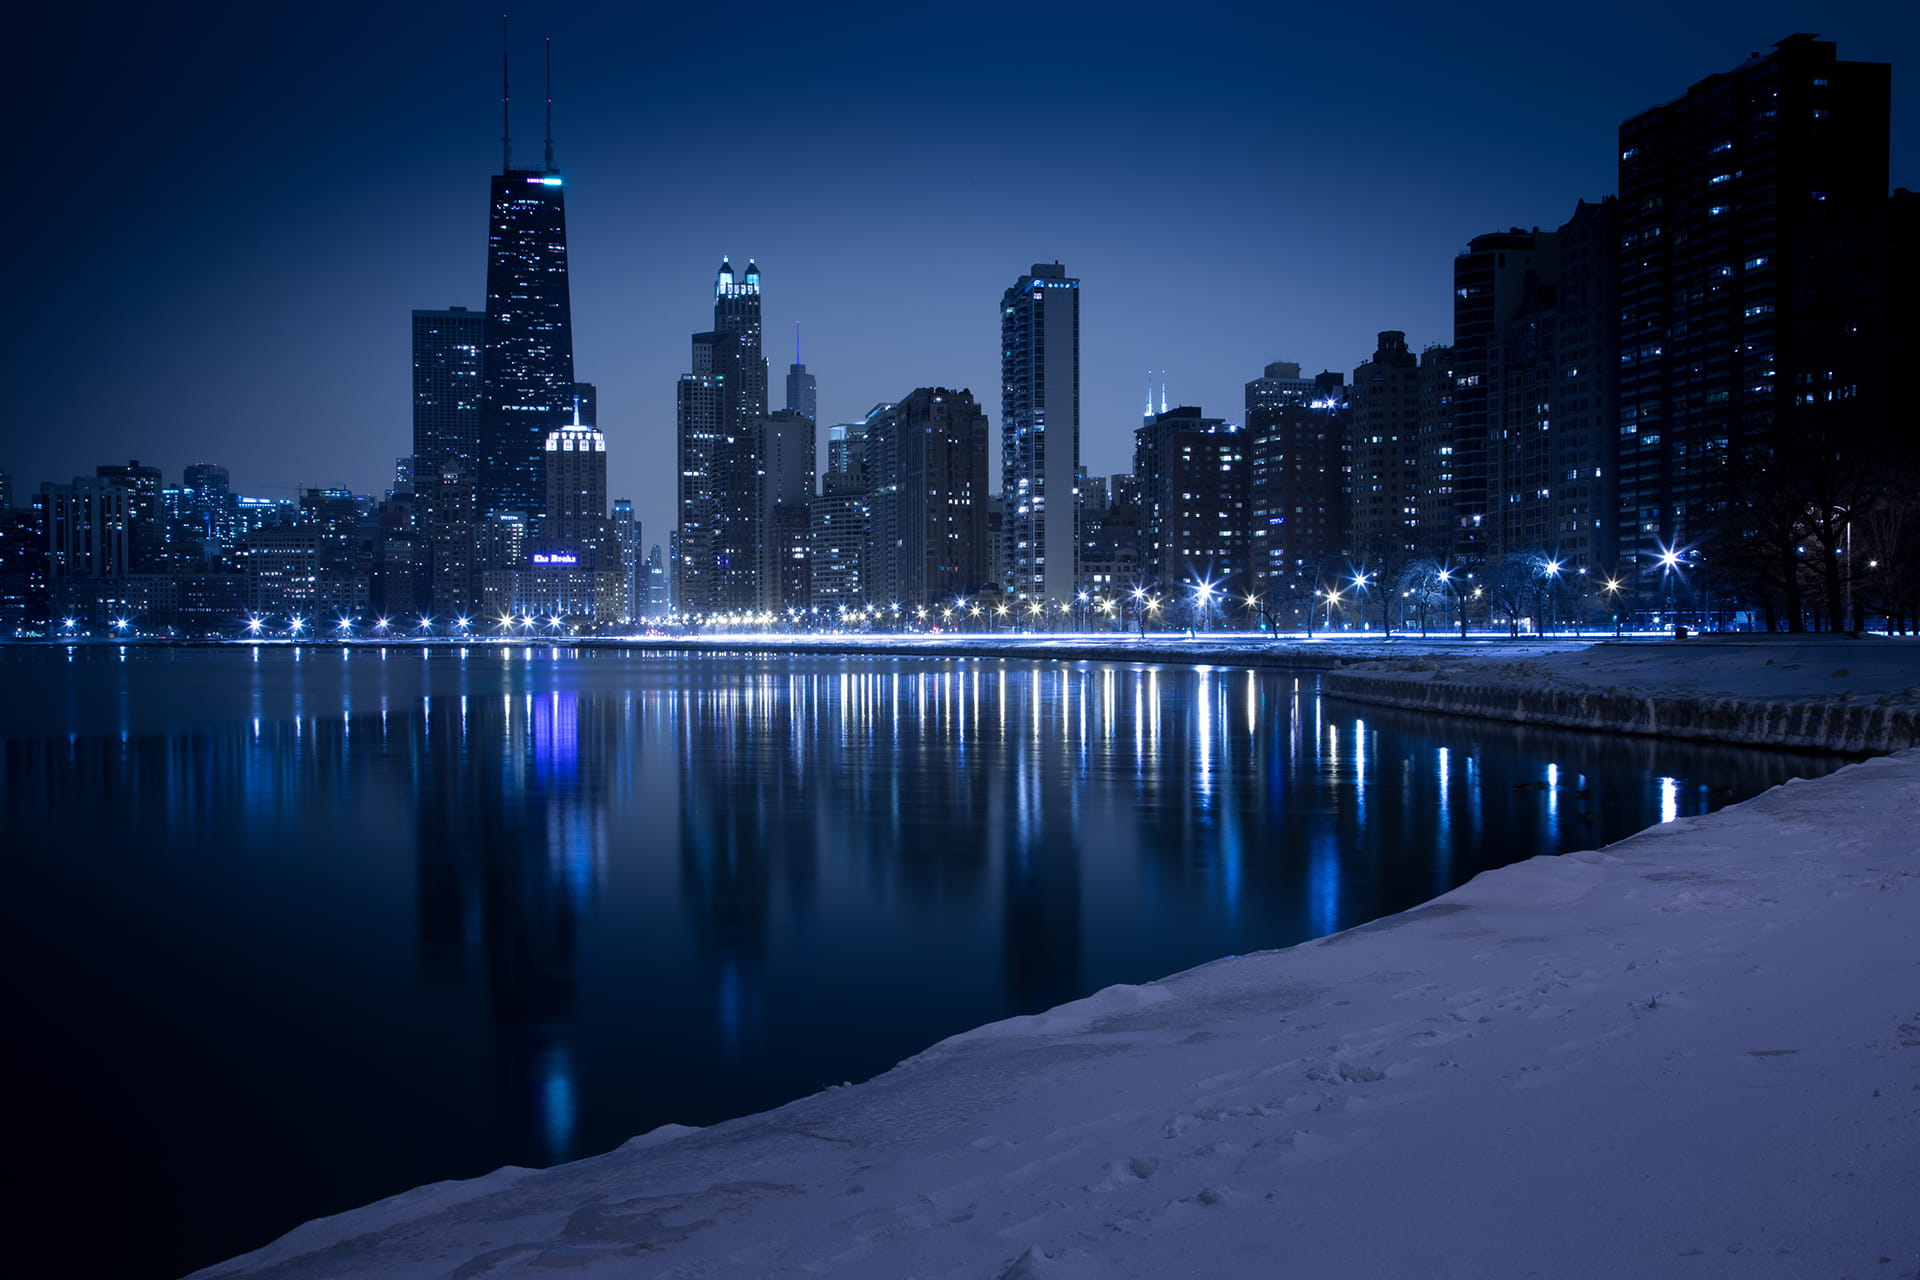 Blue and Black Chicago Skyline at Night